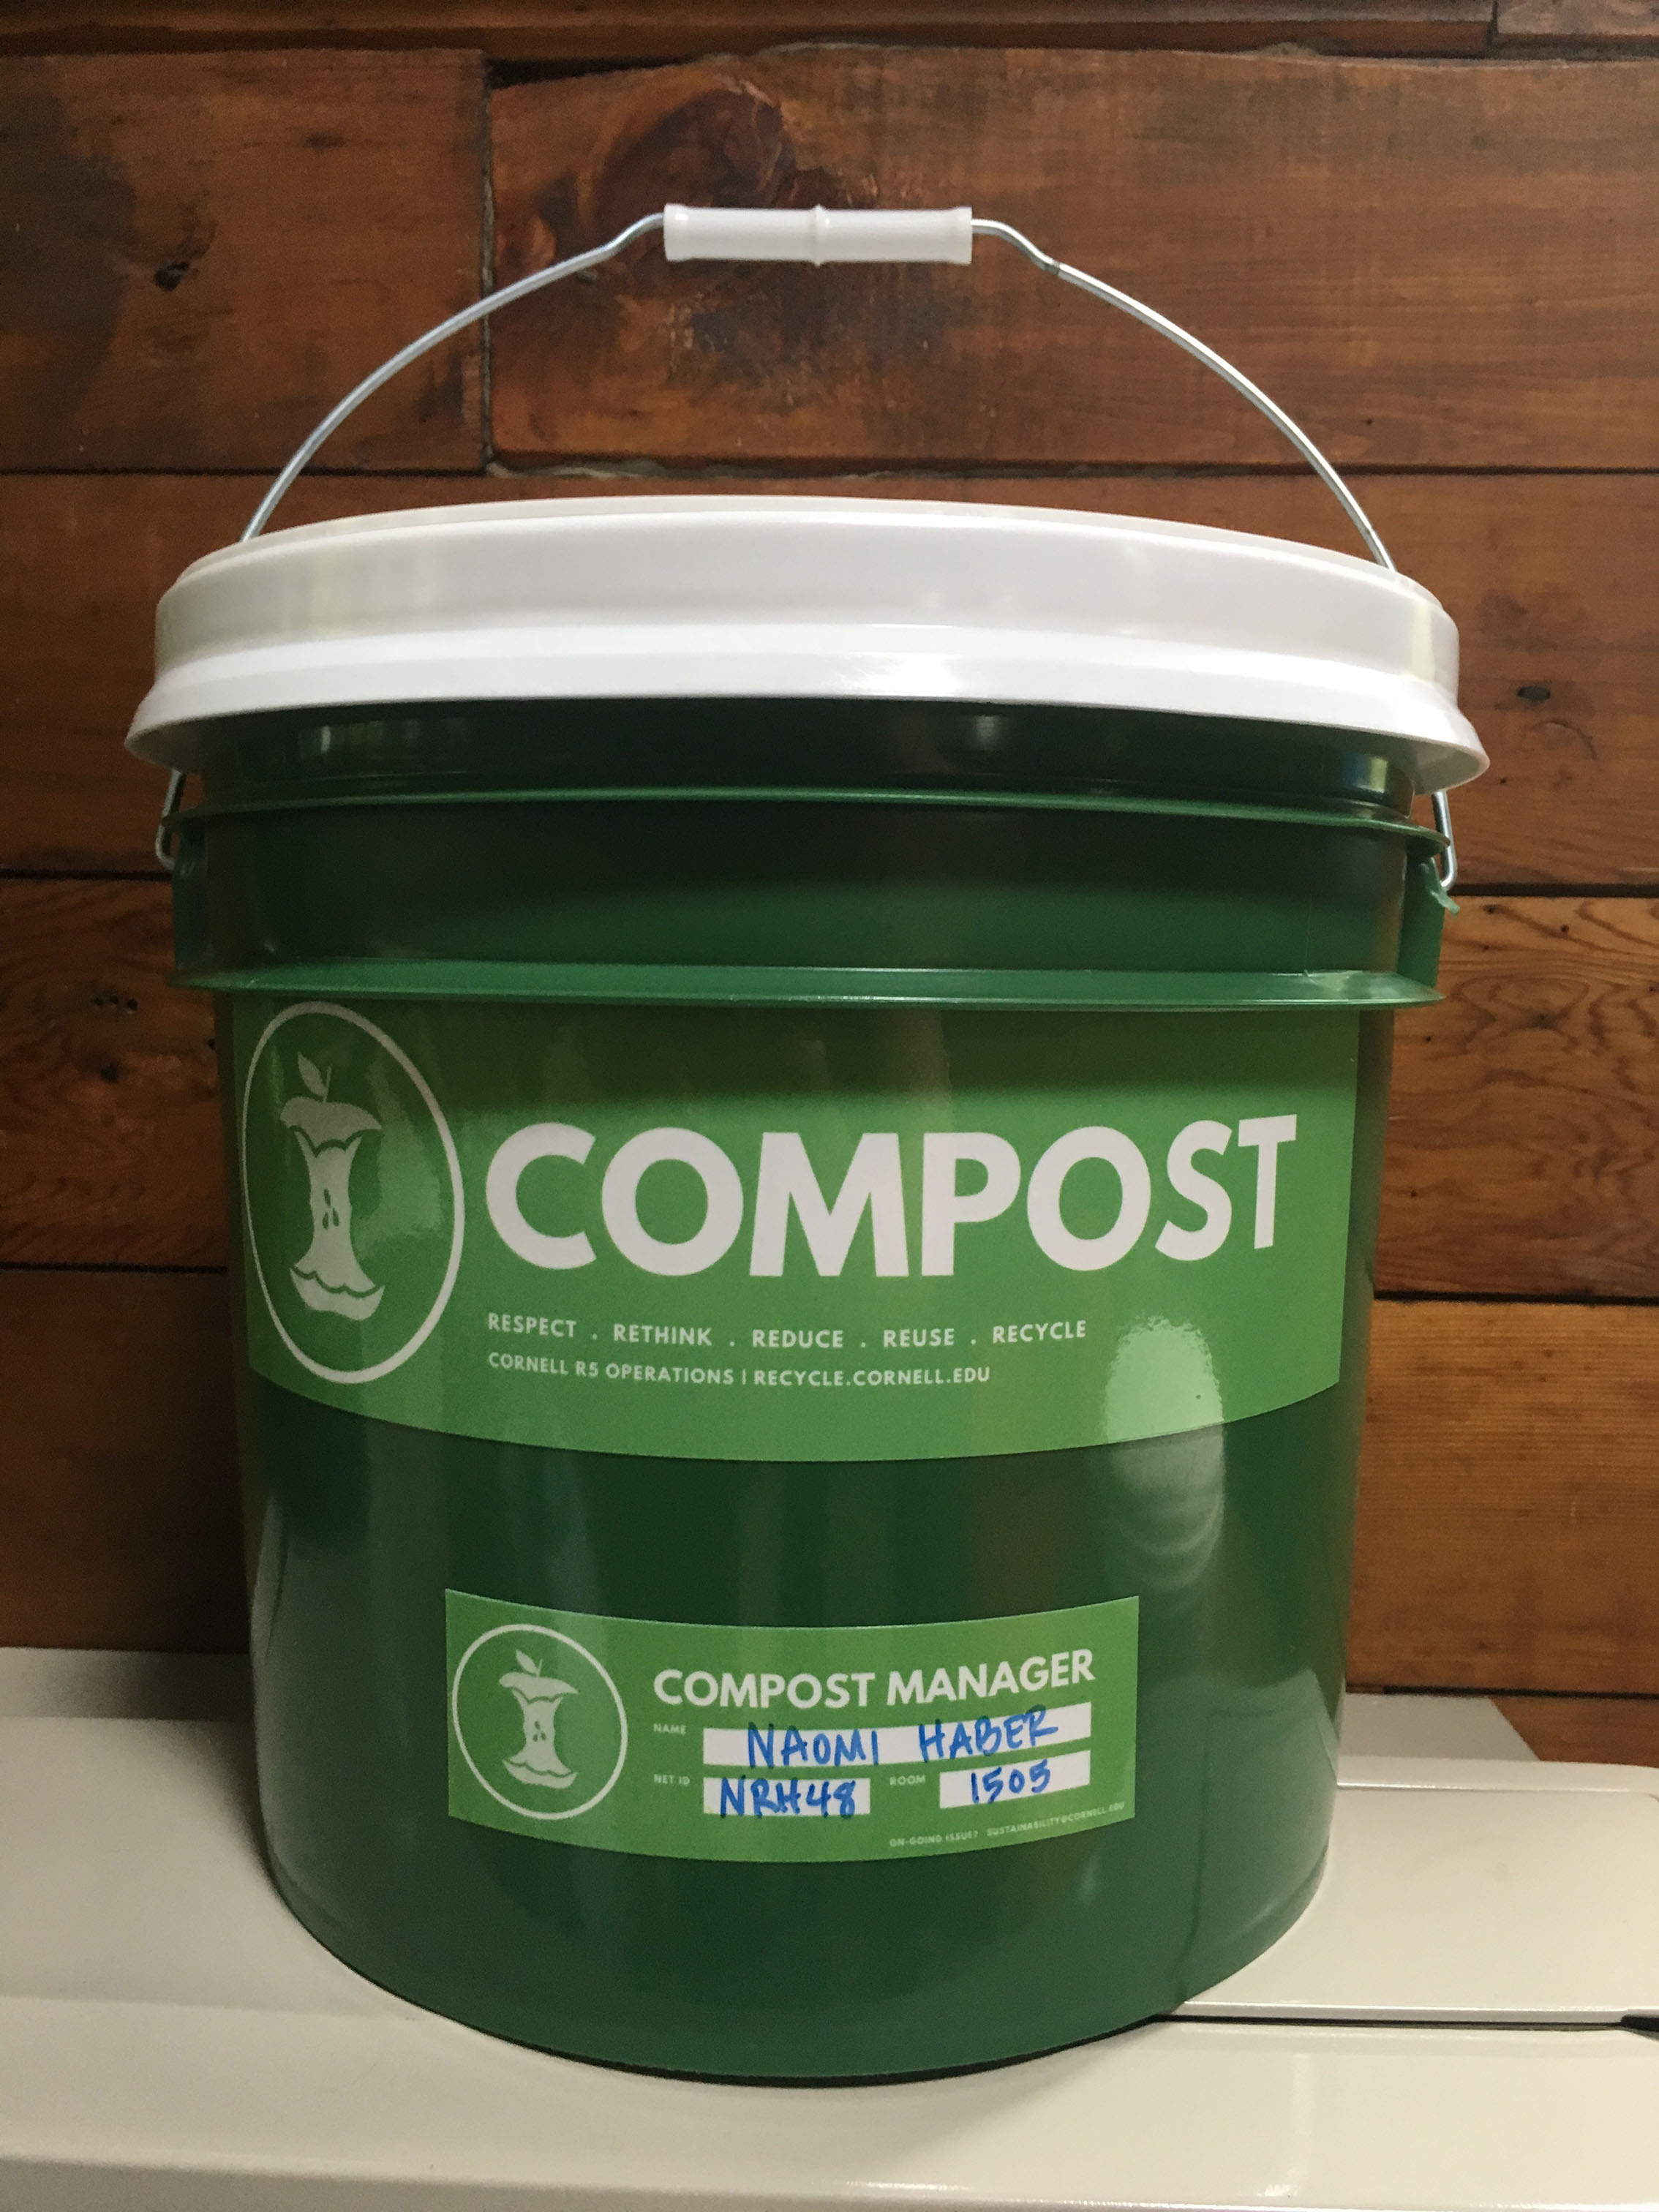 Green residential compost bucket with text "Compost" and name of contact for that residential facility